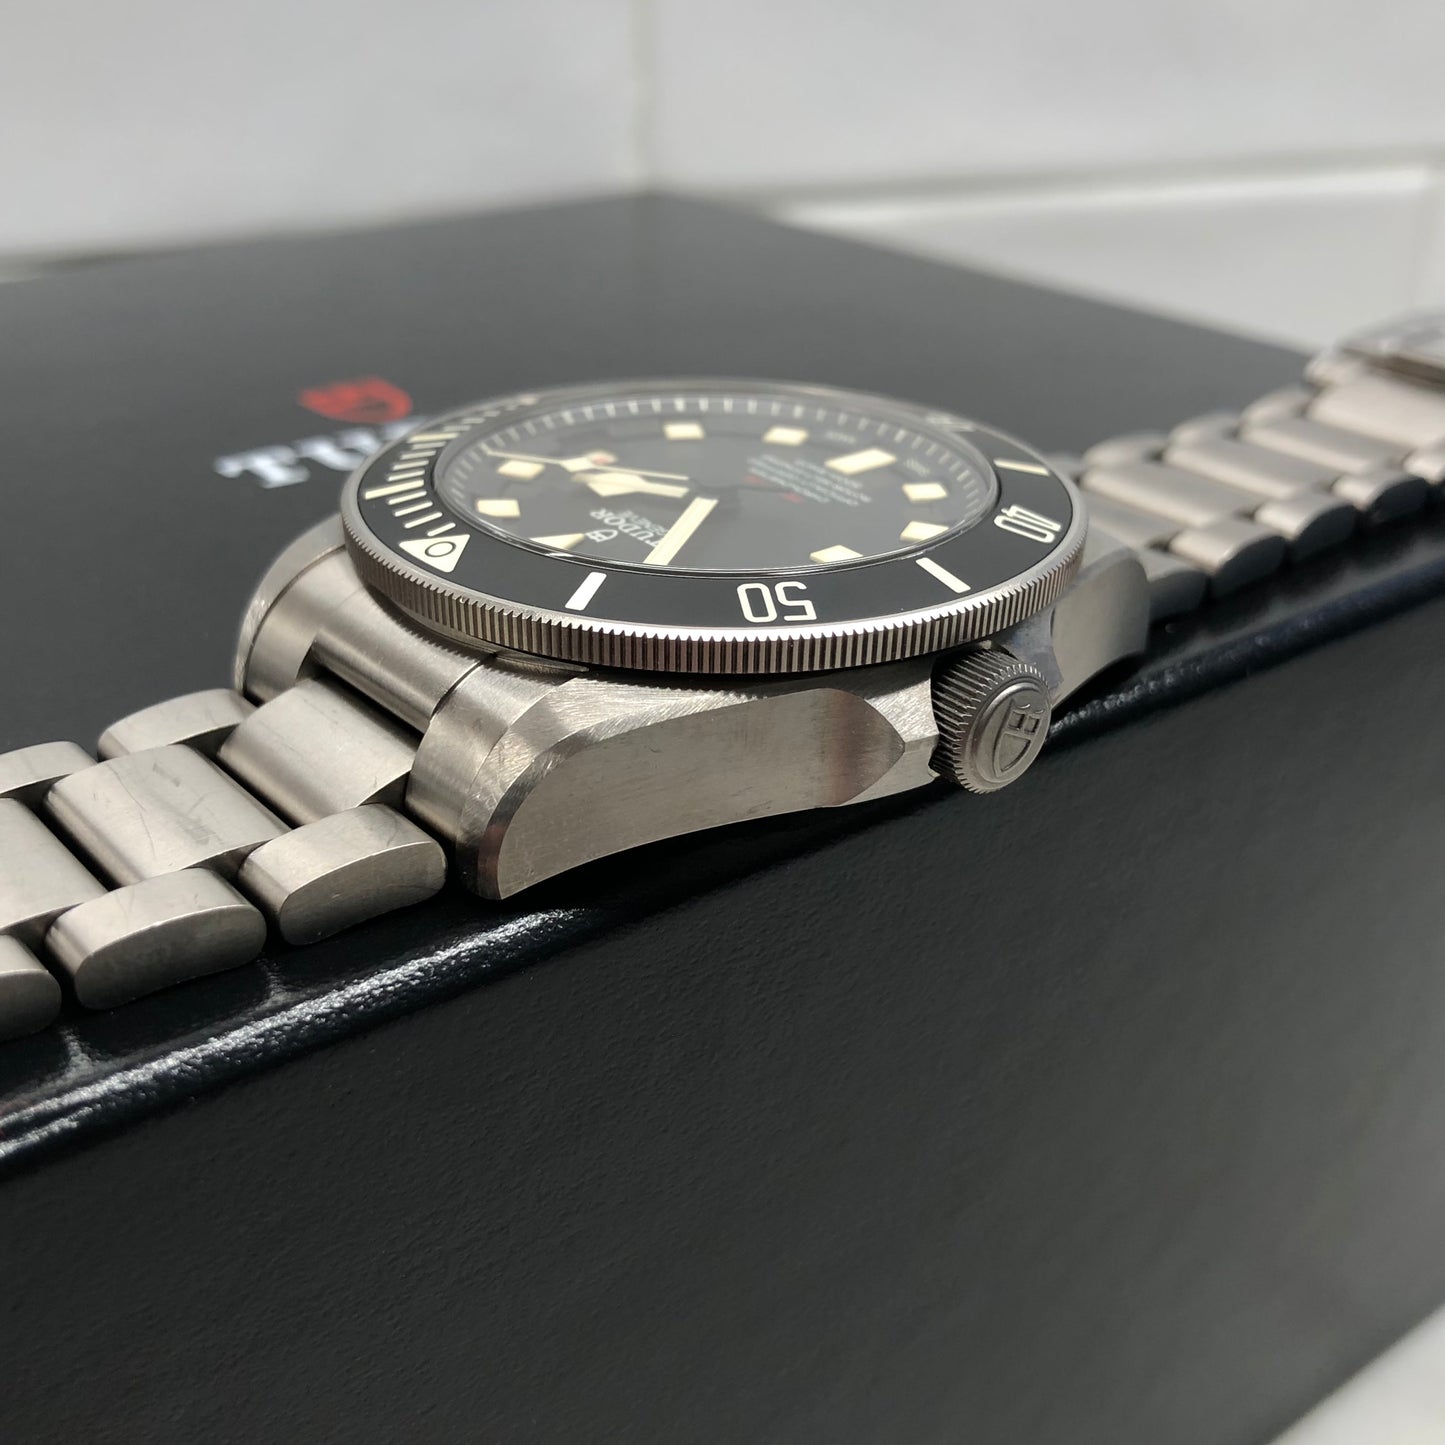 2018 Tudor Pelagos LHD 25610TNL Titanium Automatic 42mm Wristwatch with Box and Papers - Hashtag Watch Company